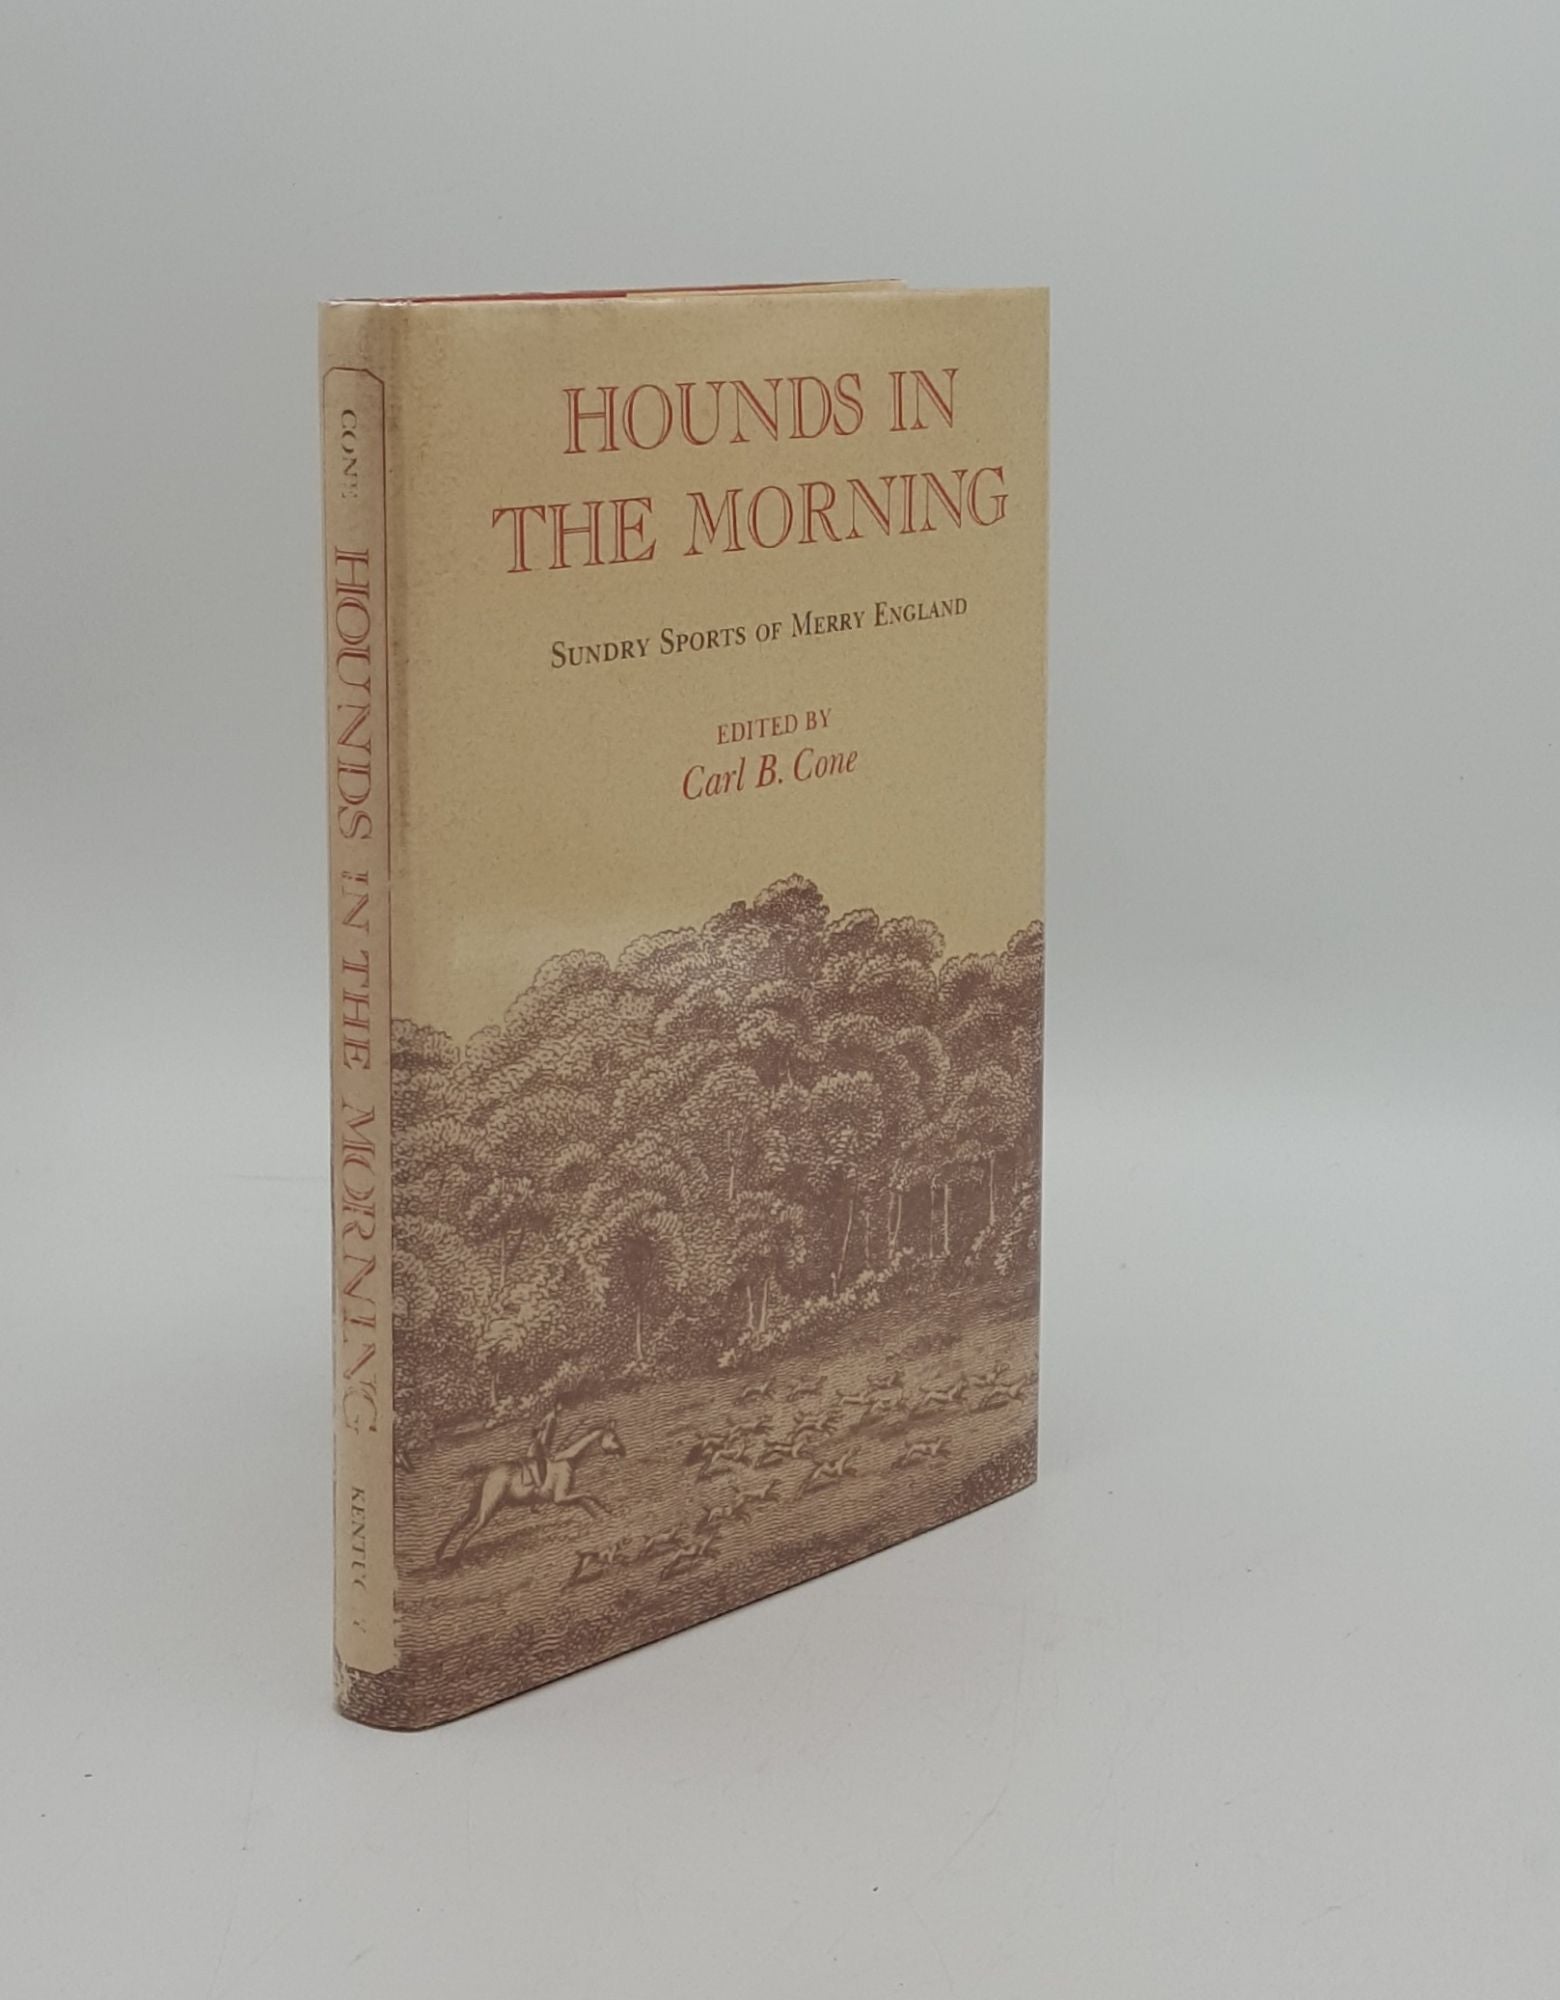 CONE Carl B. - Hounds in the Morning Sundry Sports of Merry England Excerpts from the Sporting Magazine 1792-1836